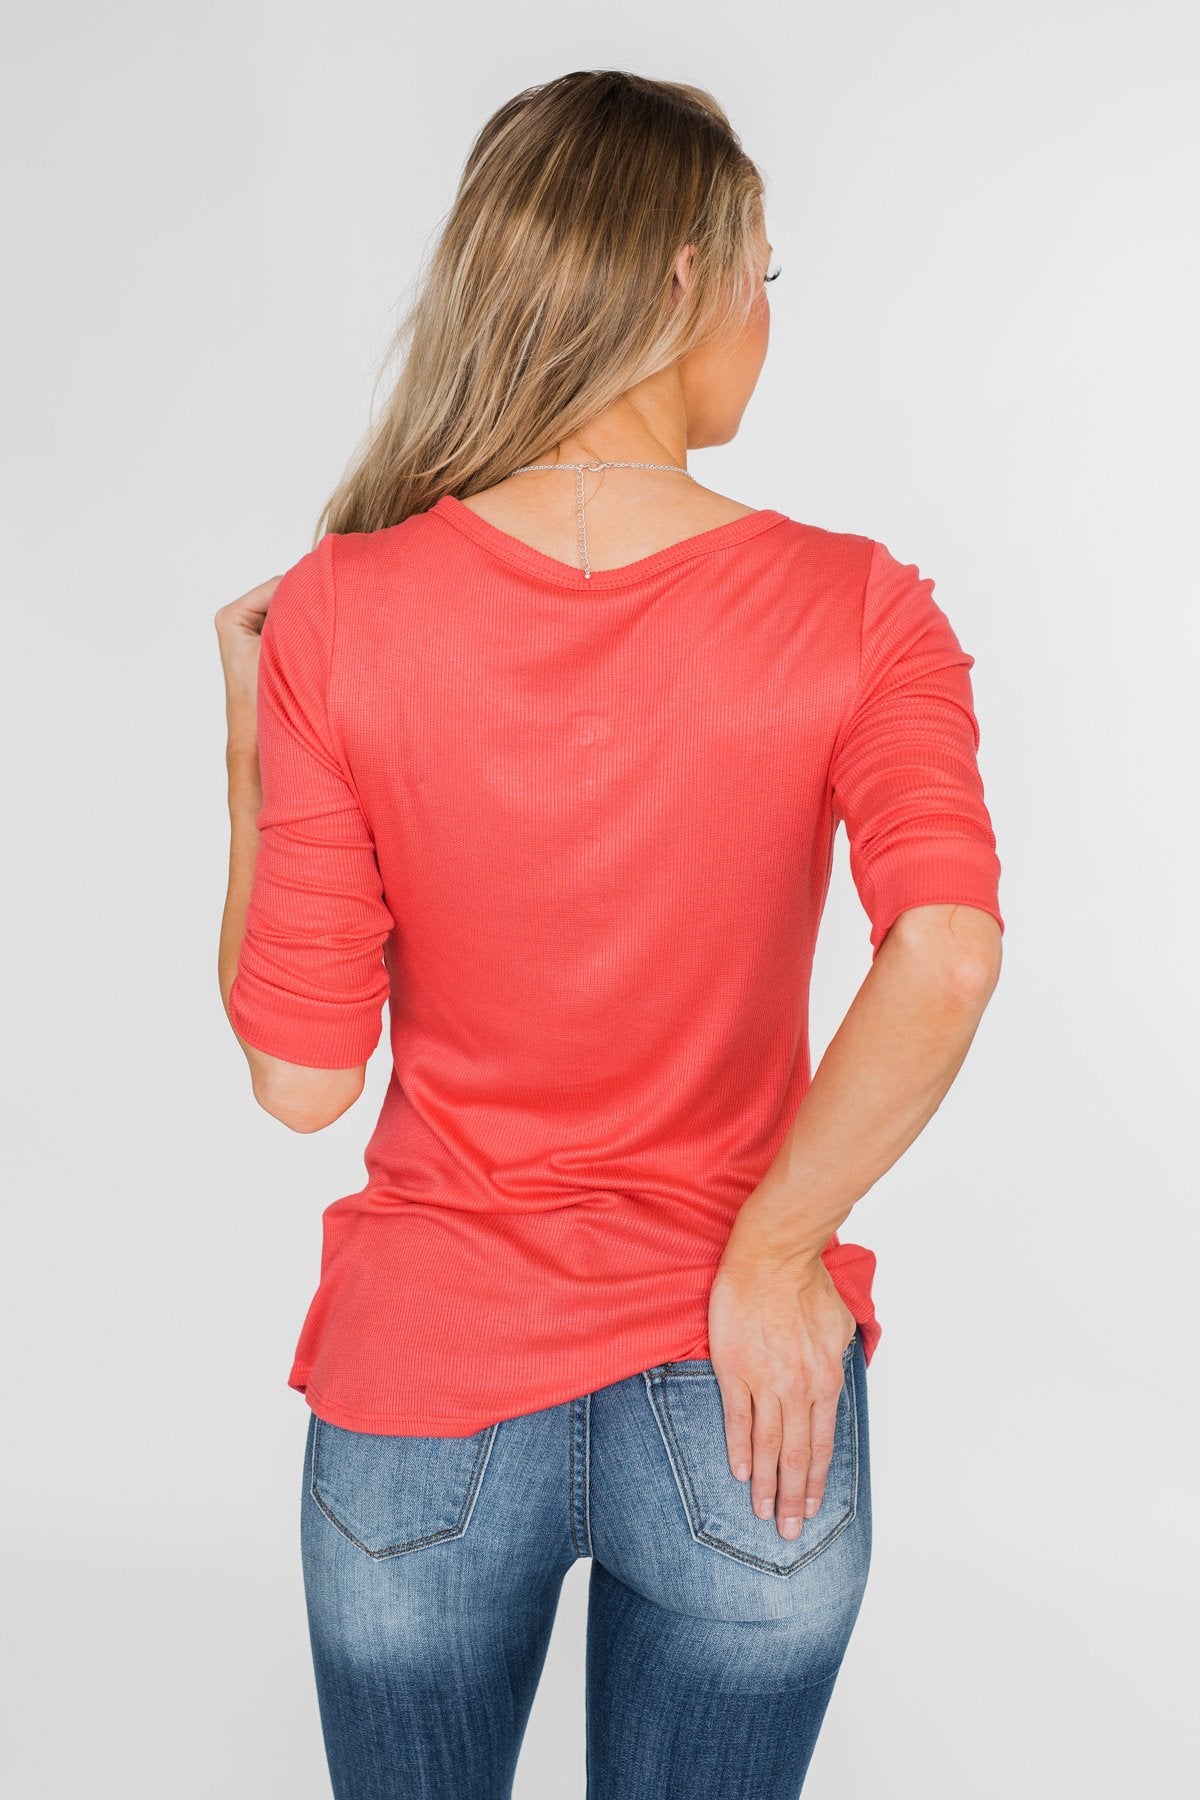 Everyday 3/4 Sleeve Henley - Coral